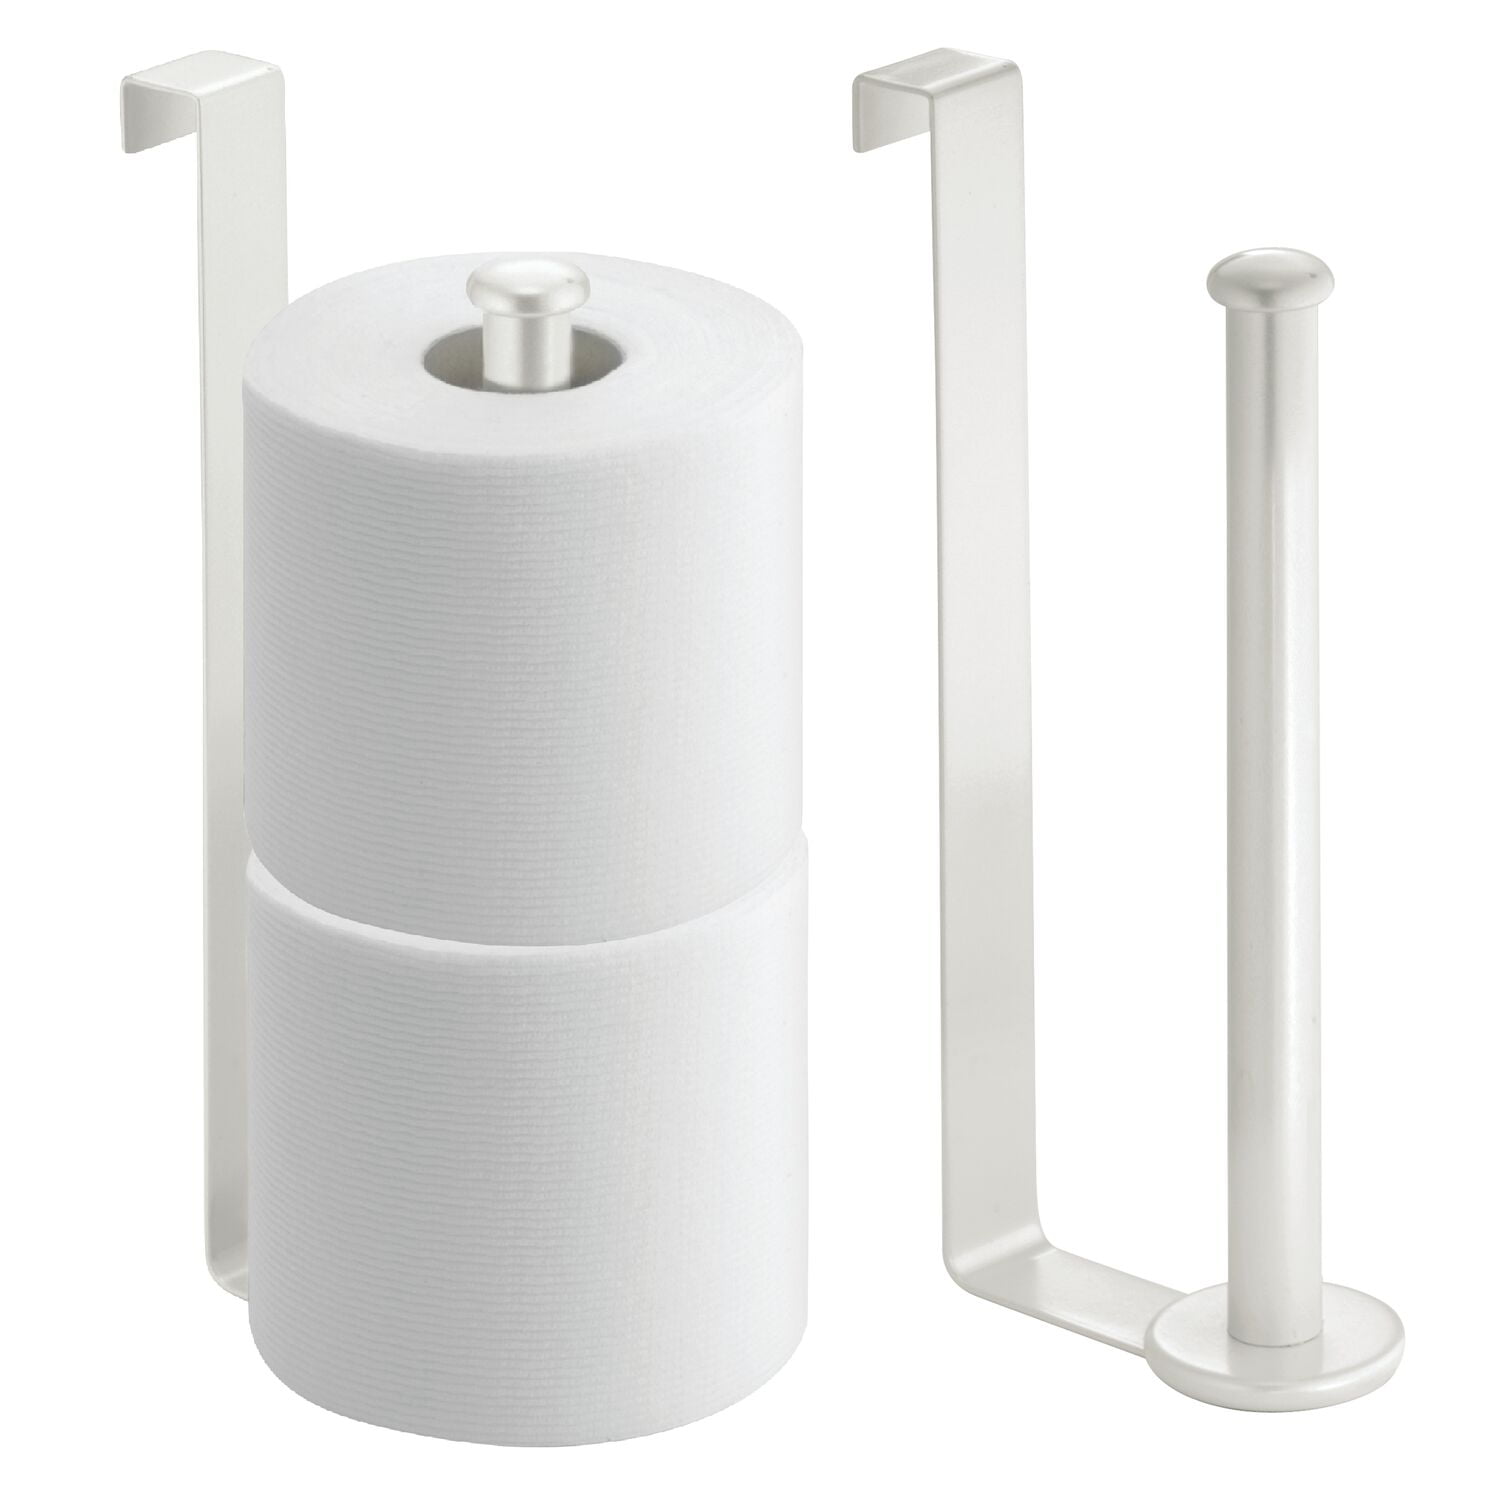 SunnyPoint Toilet Paper Holder with Circle Base